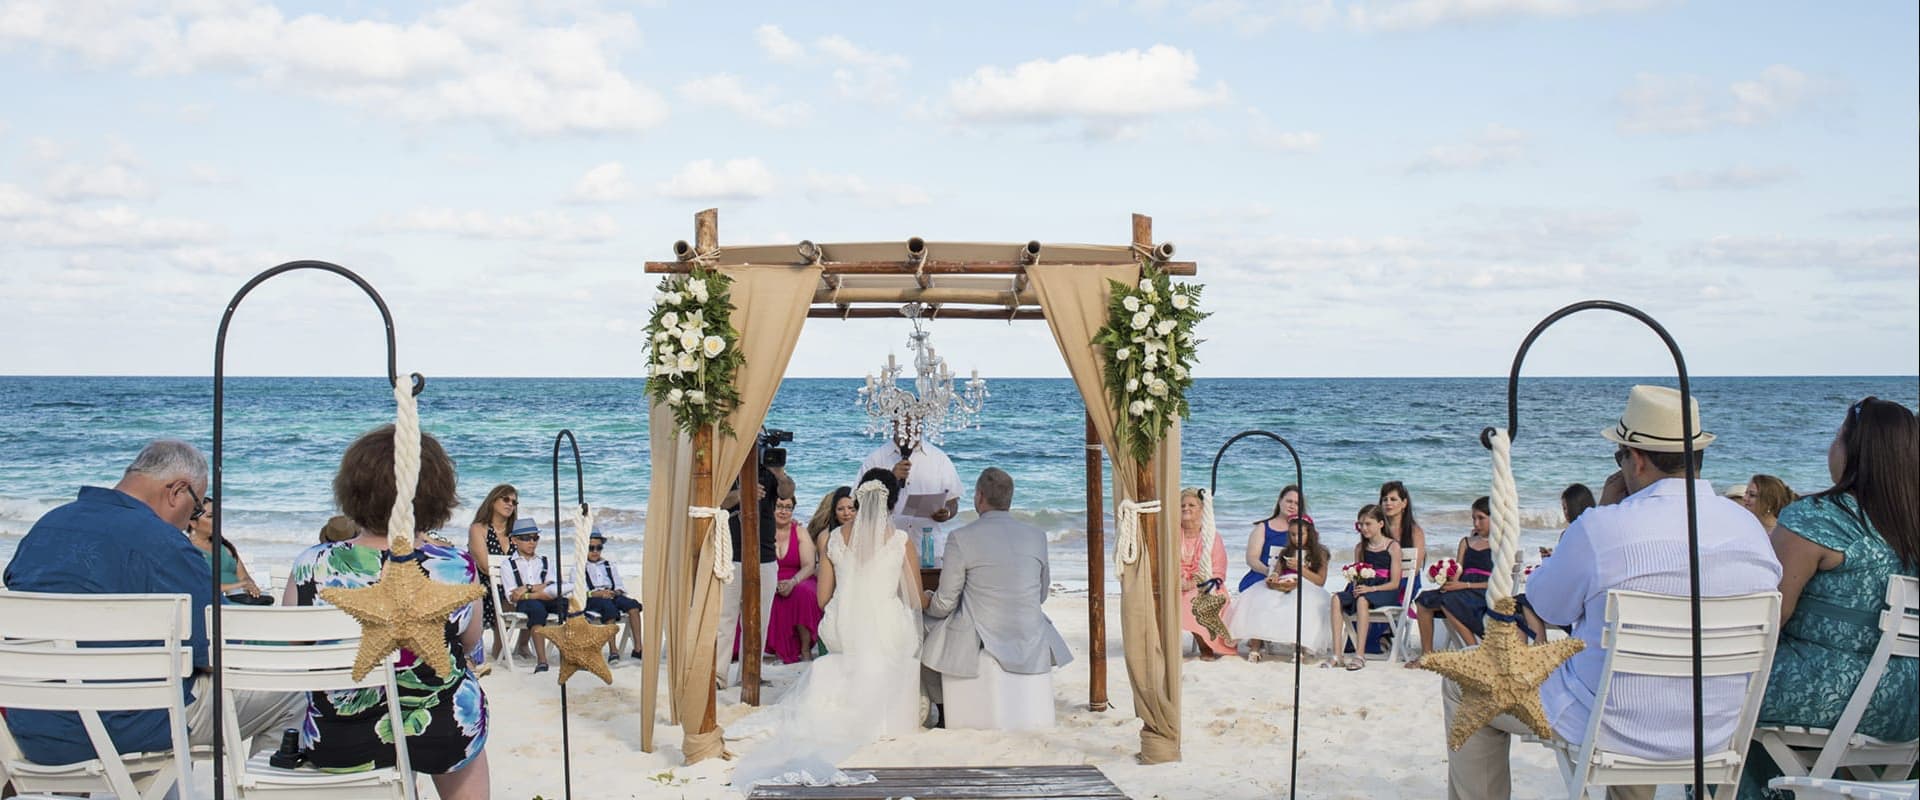 Tulum wedding venues Get married on the beach or a cenote